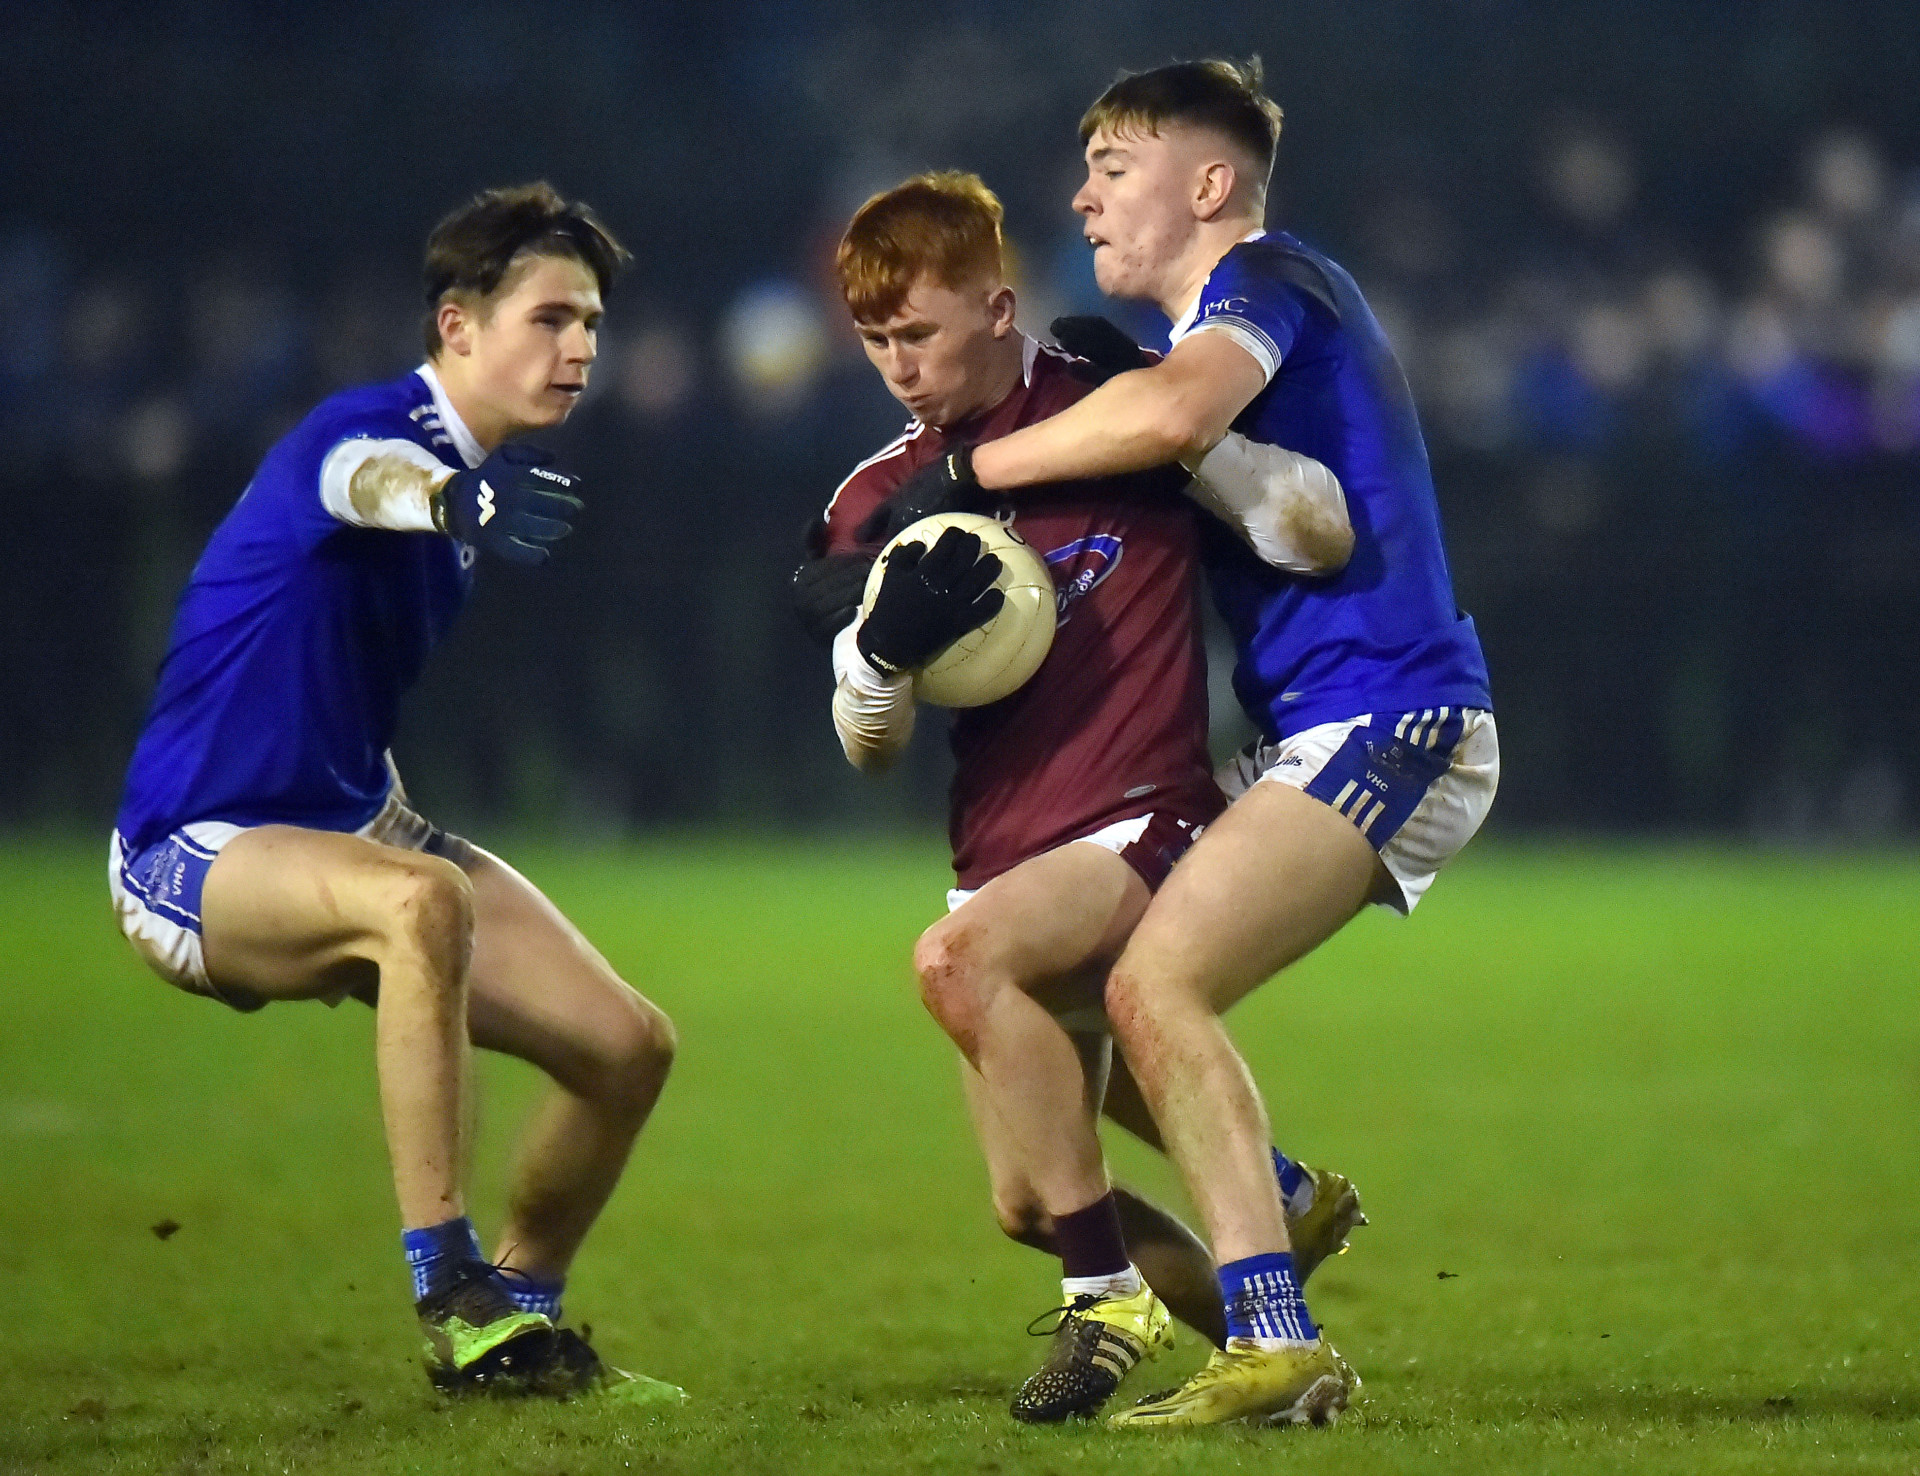 Mixed fortunes in MacRory Cup quarter-finals